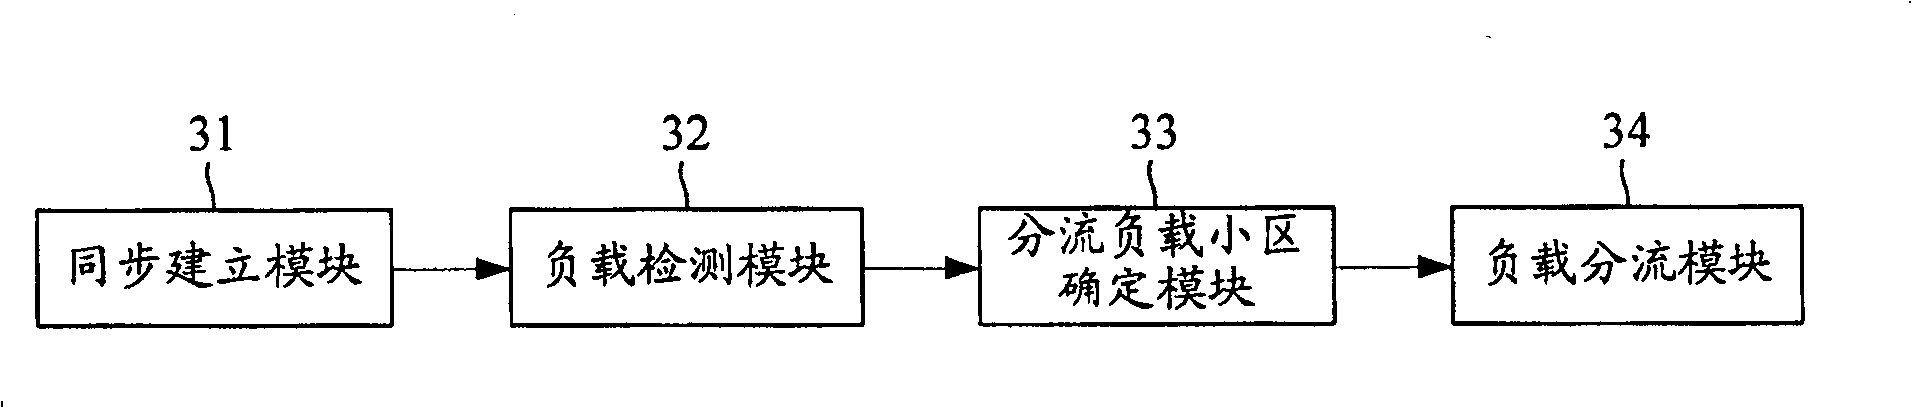 Load bridging method and device